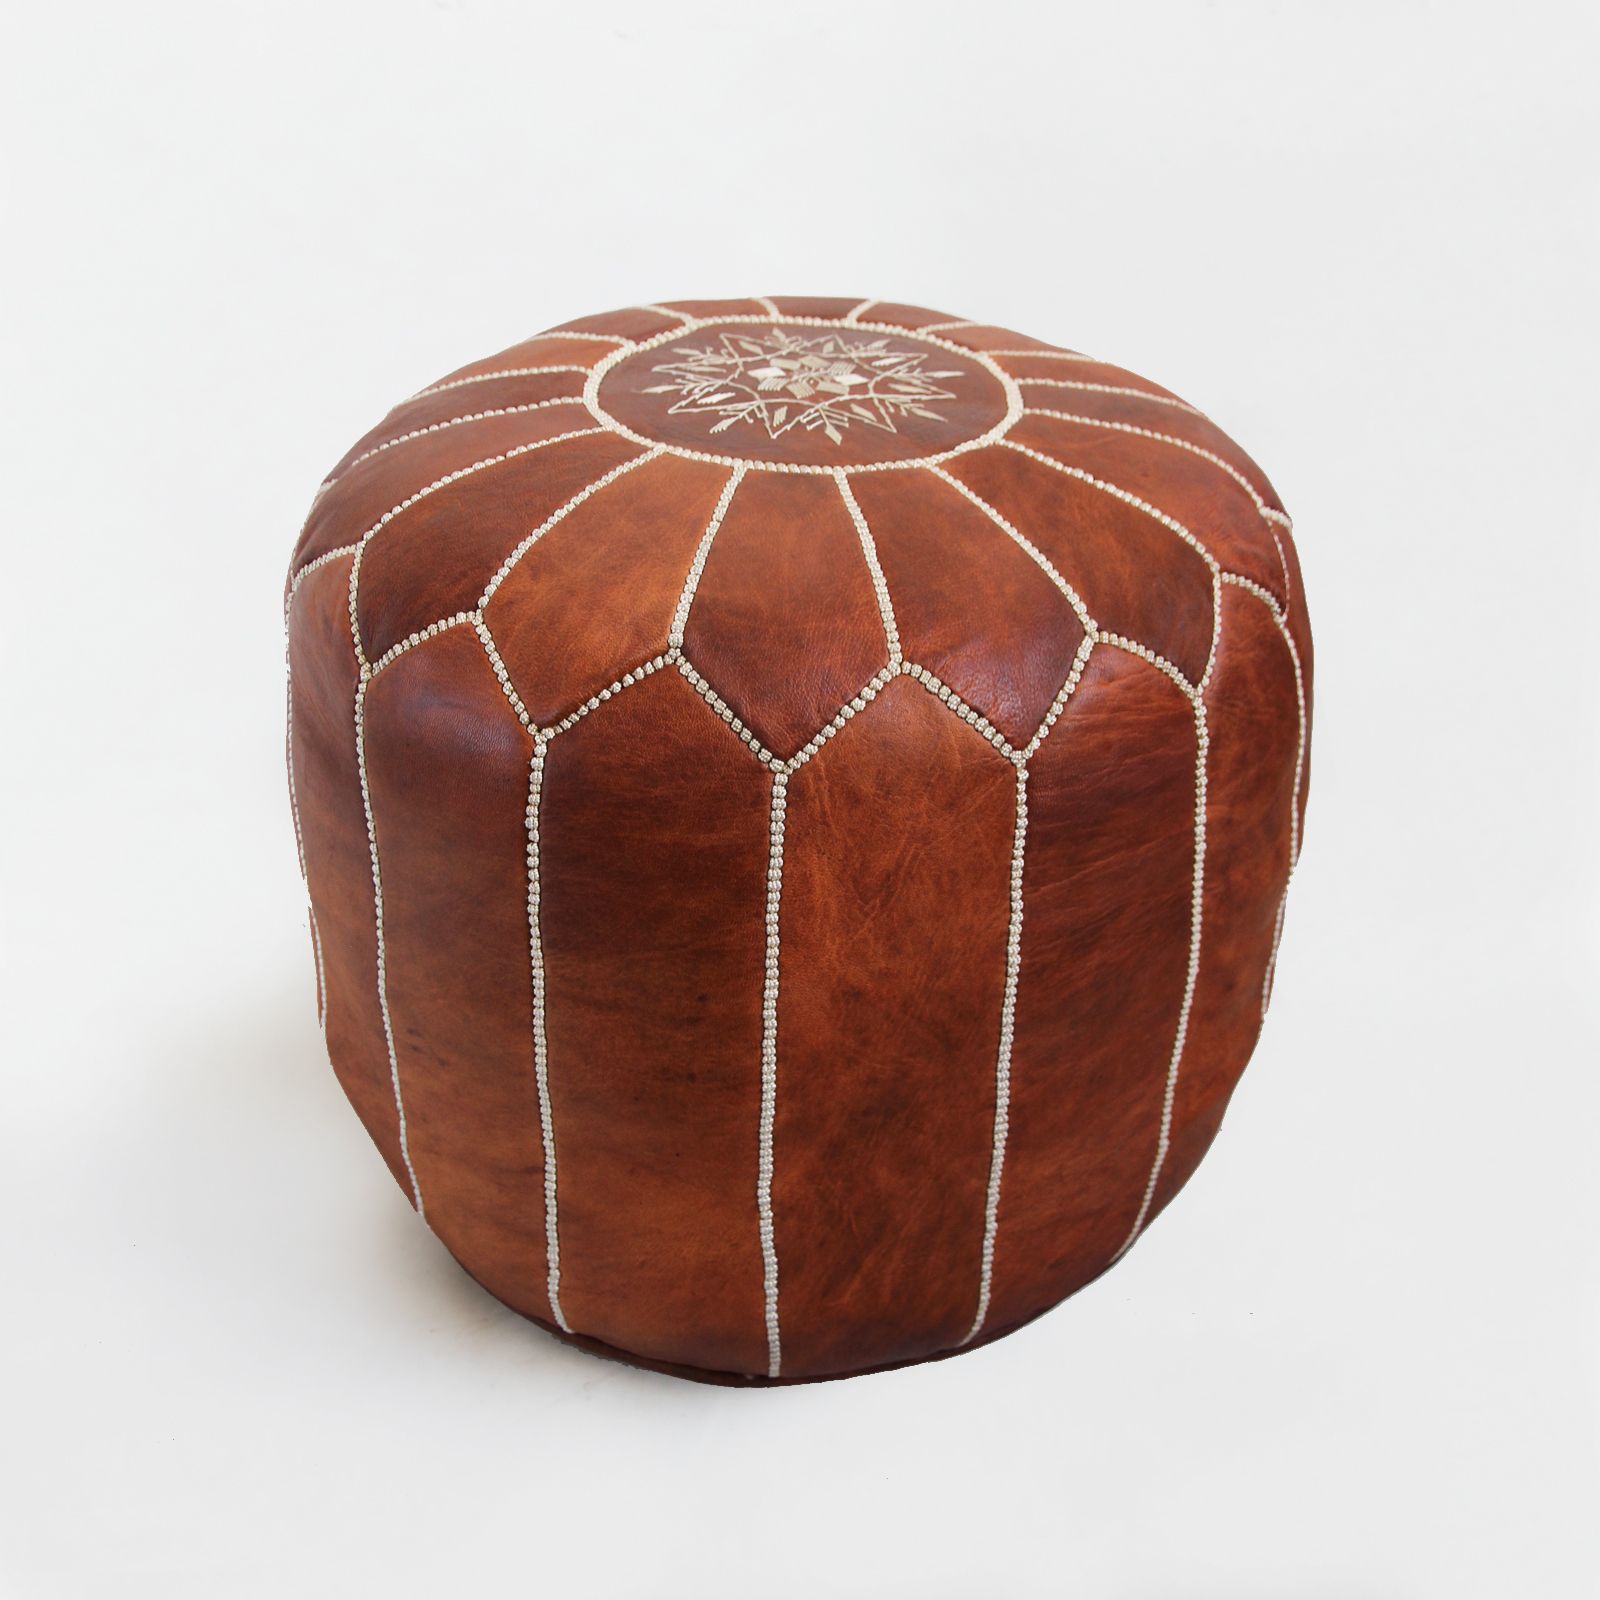 Tall Leather Moroccan Ottoman/pouf Stool Furniture | Design Mix Gallery Intended For Brown Moroccan Inspired Pouf Ottomans (View 11 of 20)